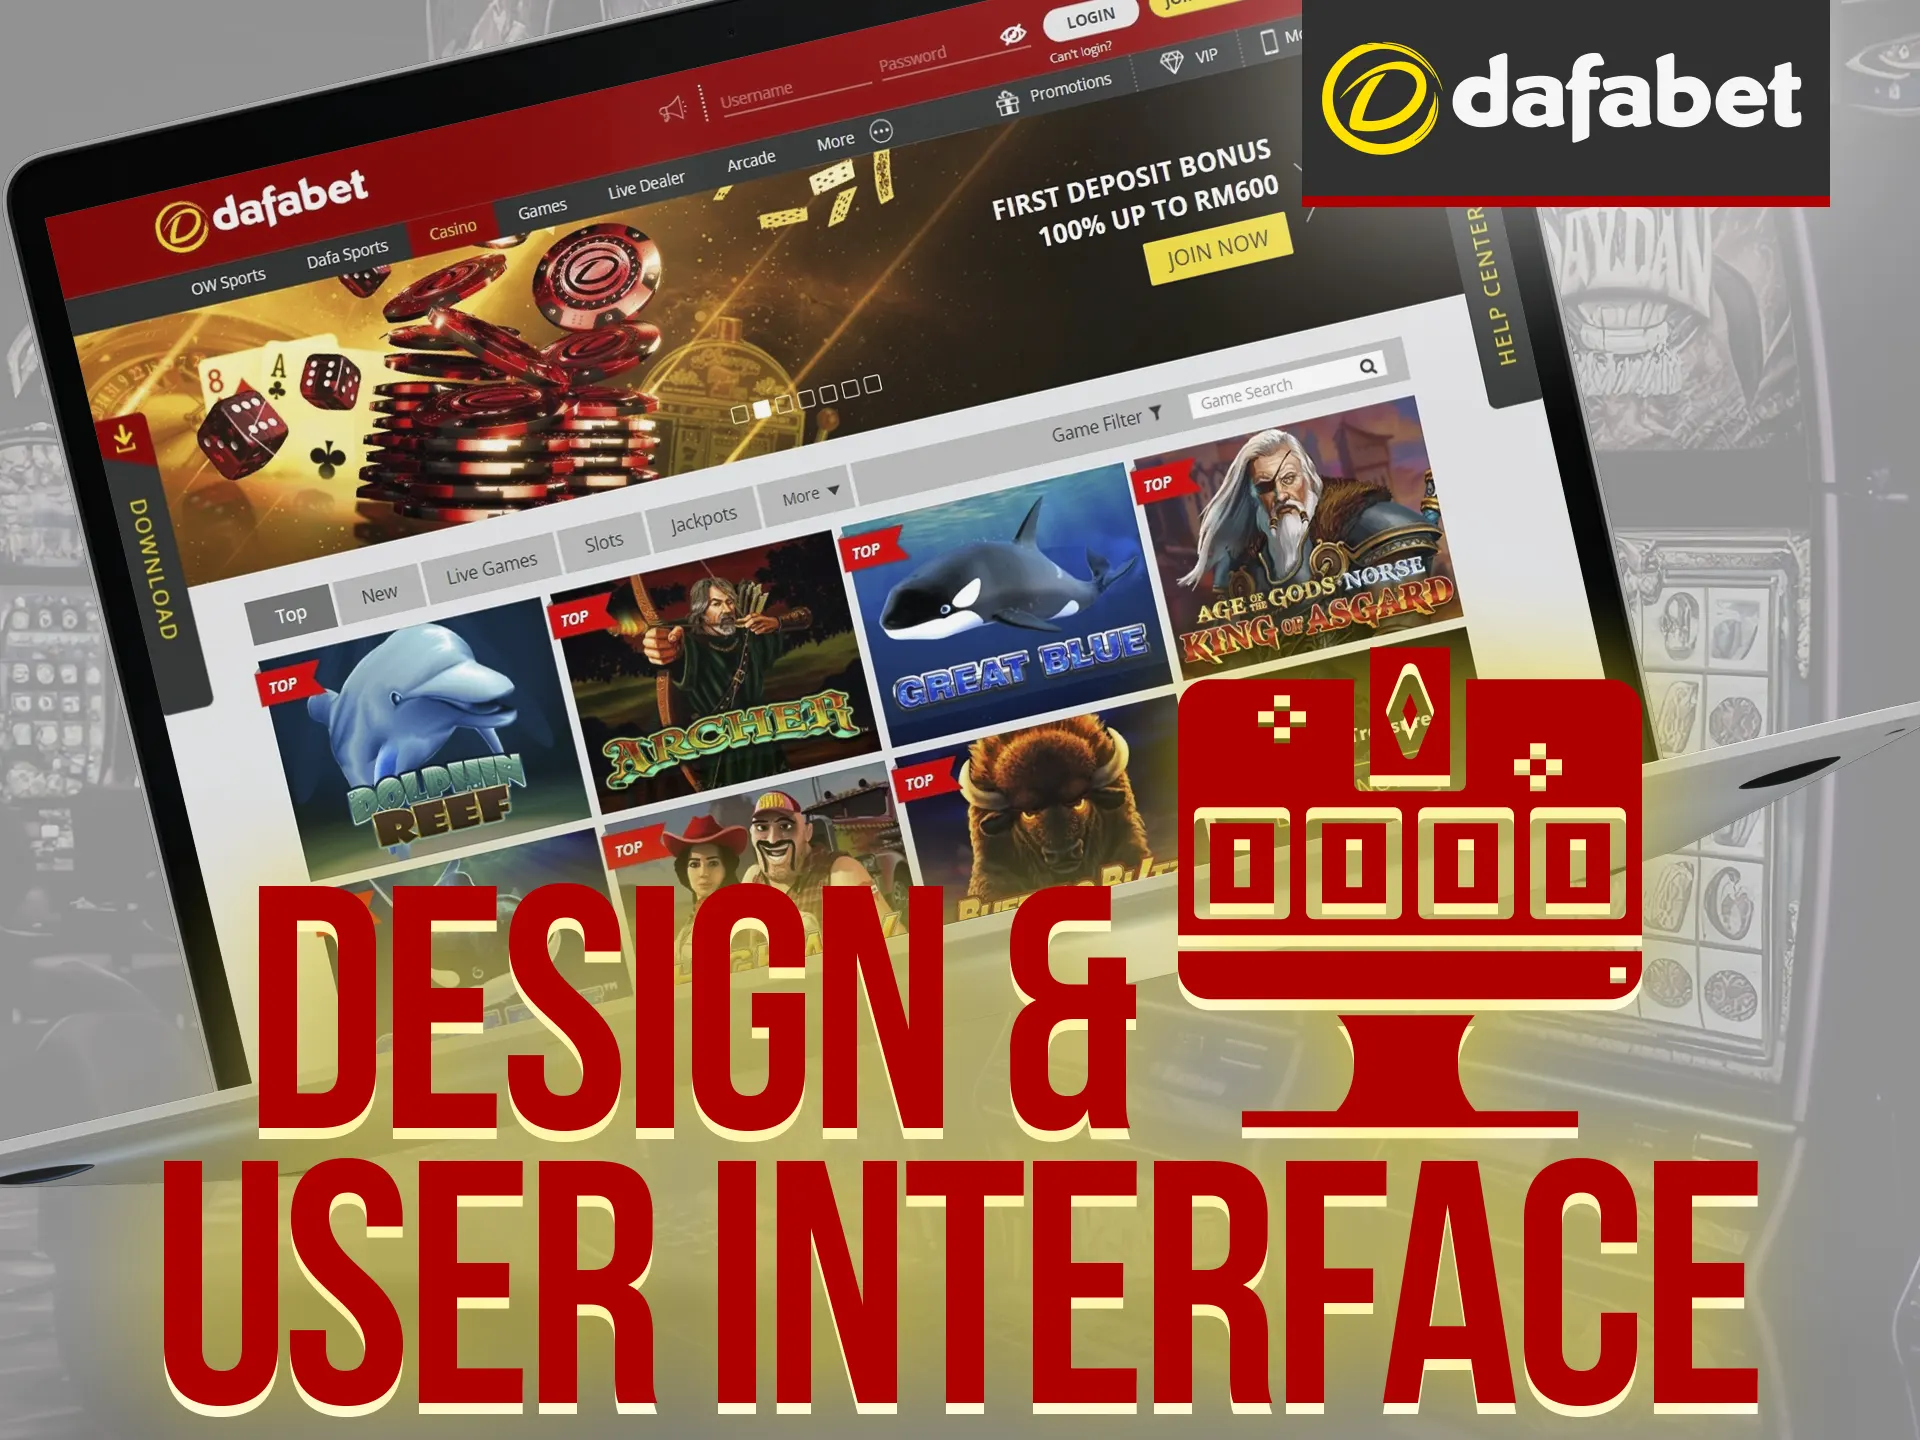 Enjoy clear navigation, white-red design, and top sections for easy access to content at Dafabet.